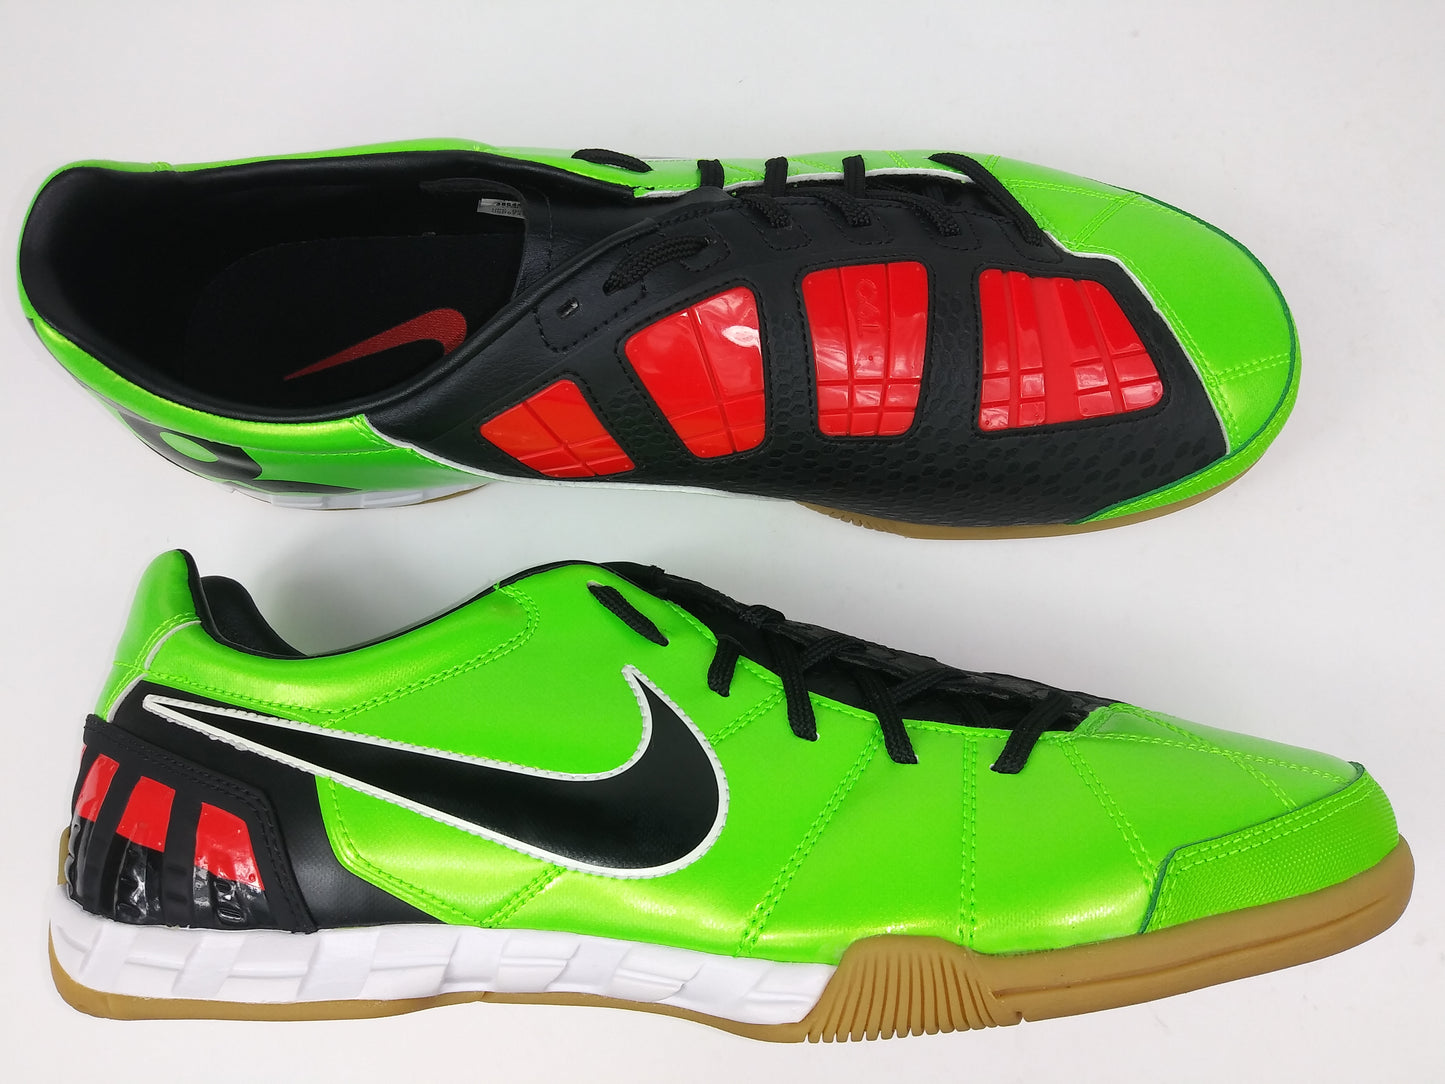 Nike Total90 Shoot lll IC Indoor Shoes Green Black